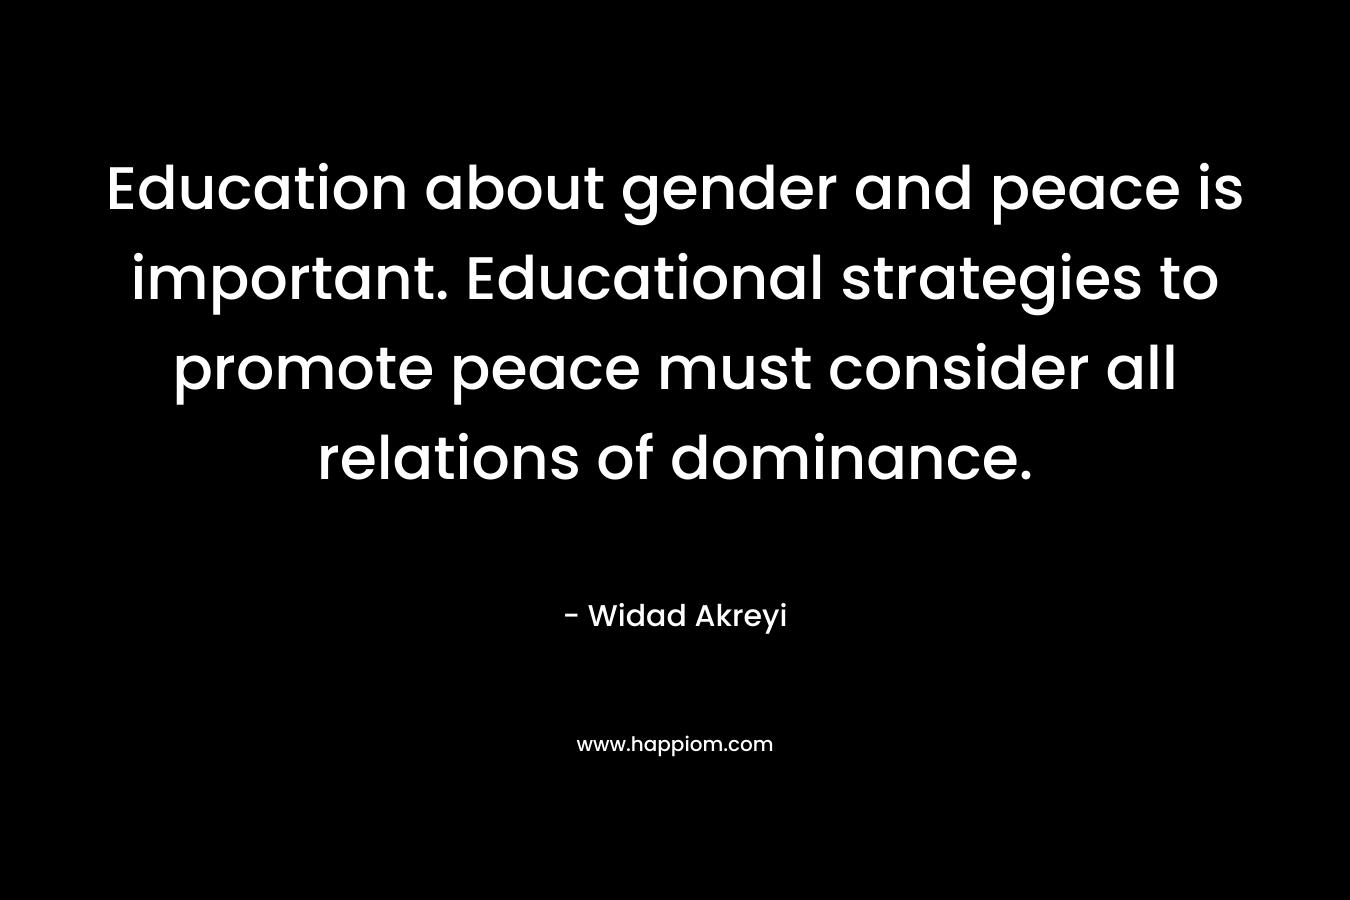 Education about gender and peace is important. Educational strategies to promote peace must consider all relations of dominance.